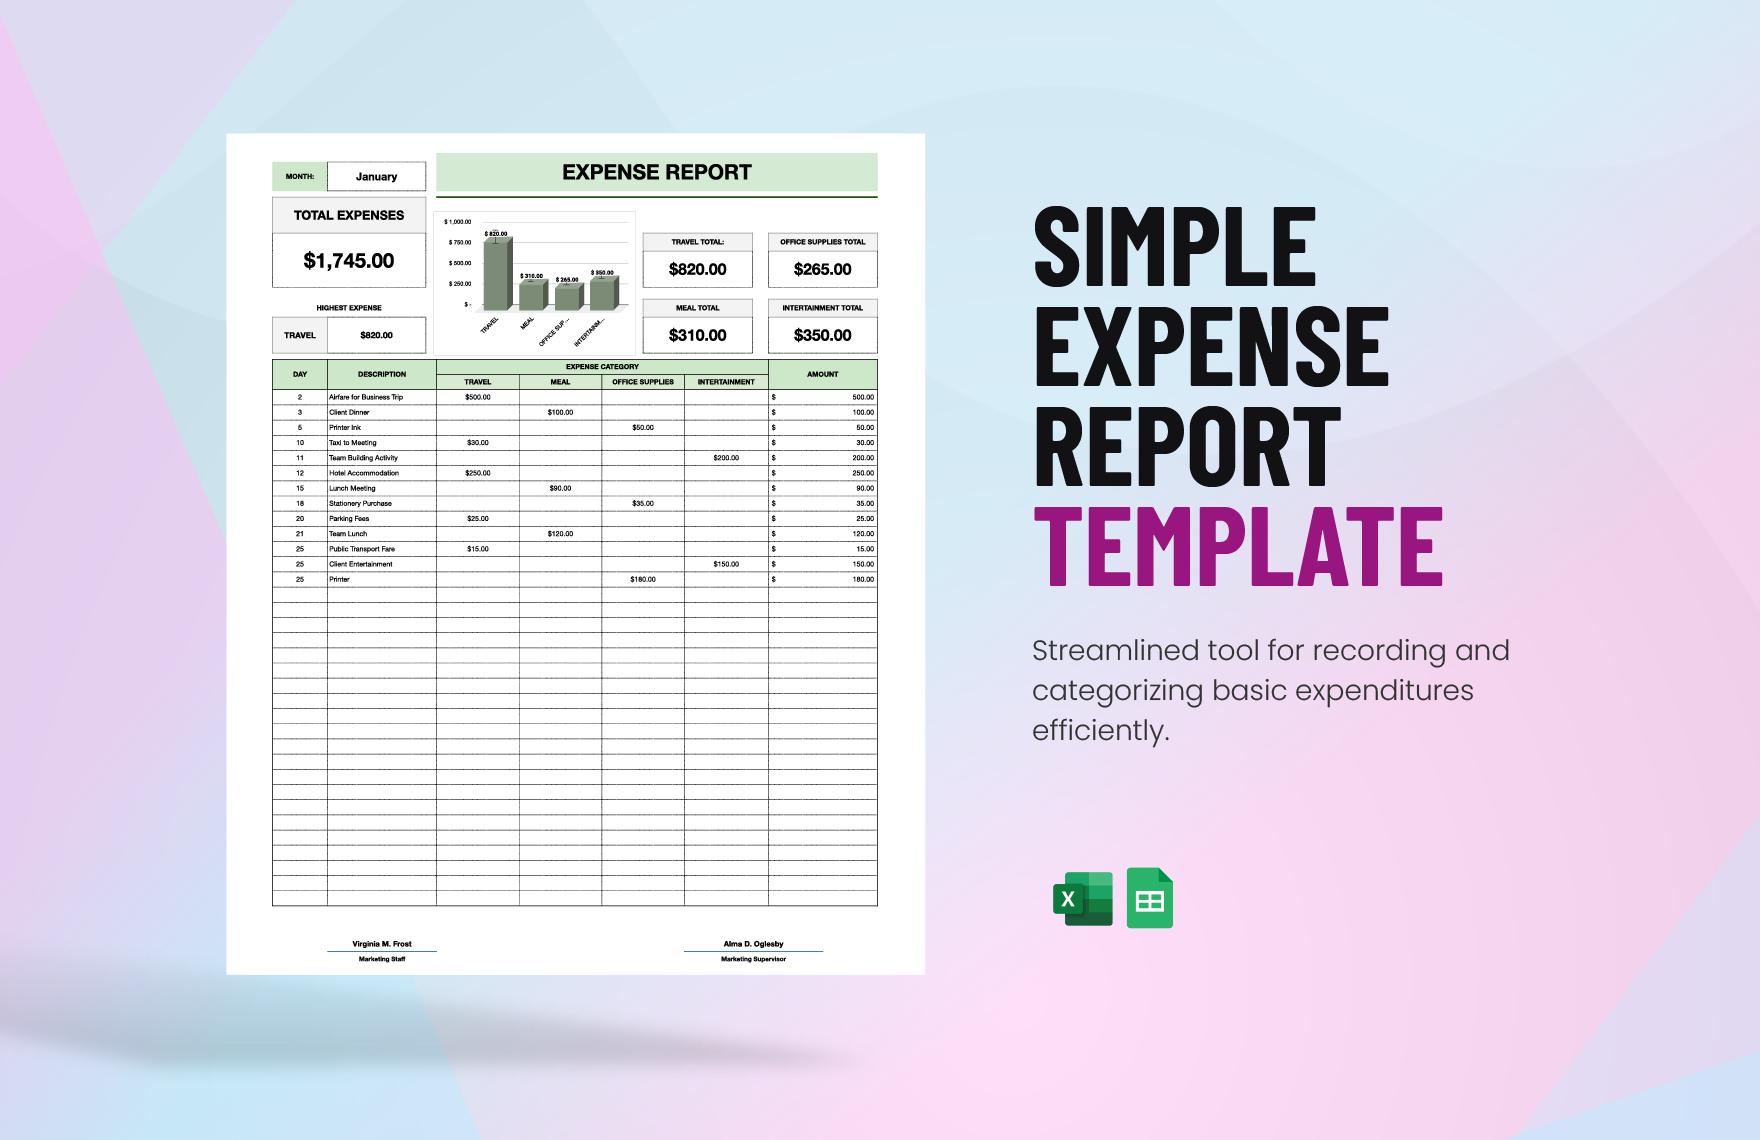 Simple Expense Report Template in Excel, Google Sheets